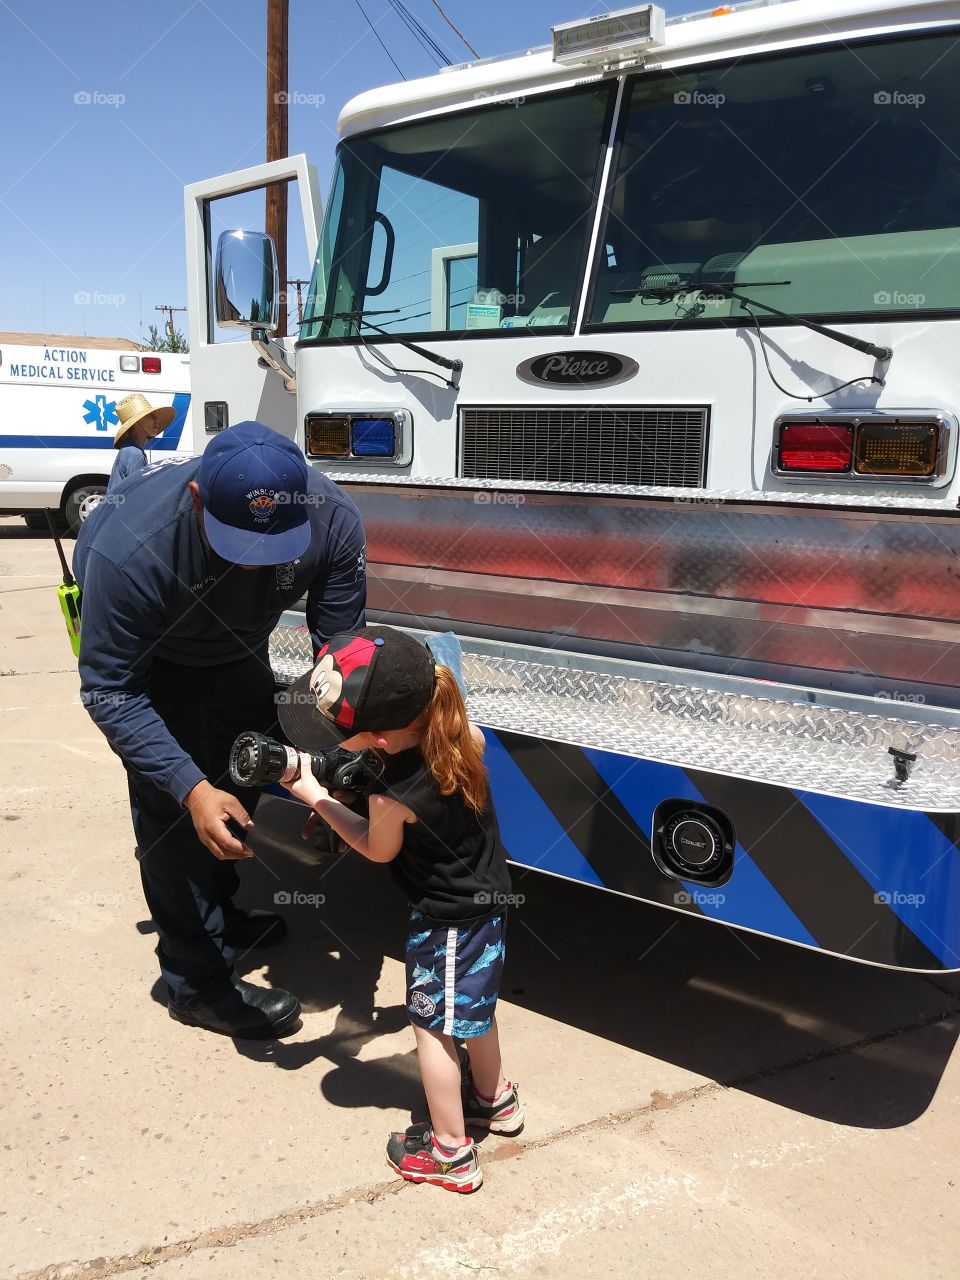 Fun with first responders on a hot summer day